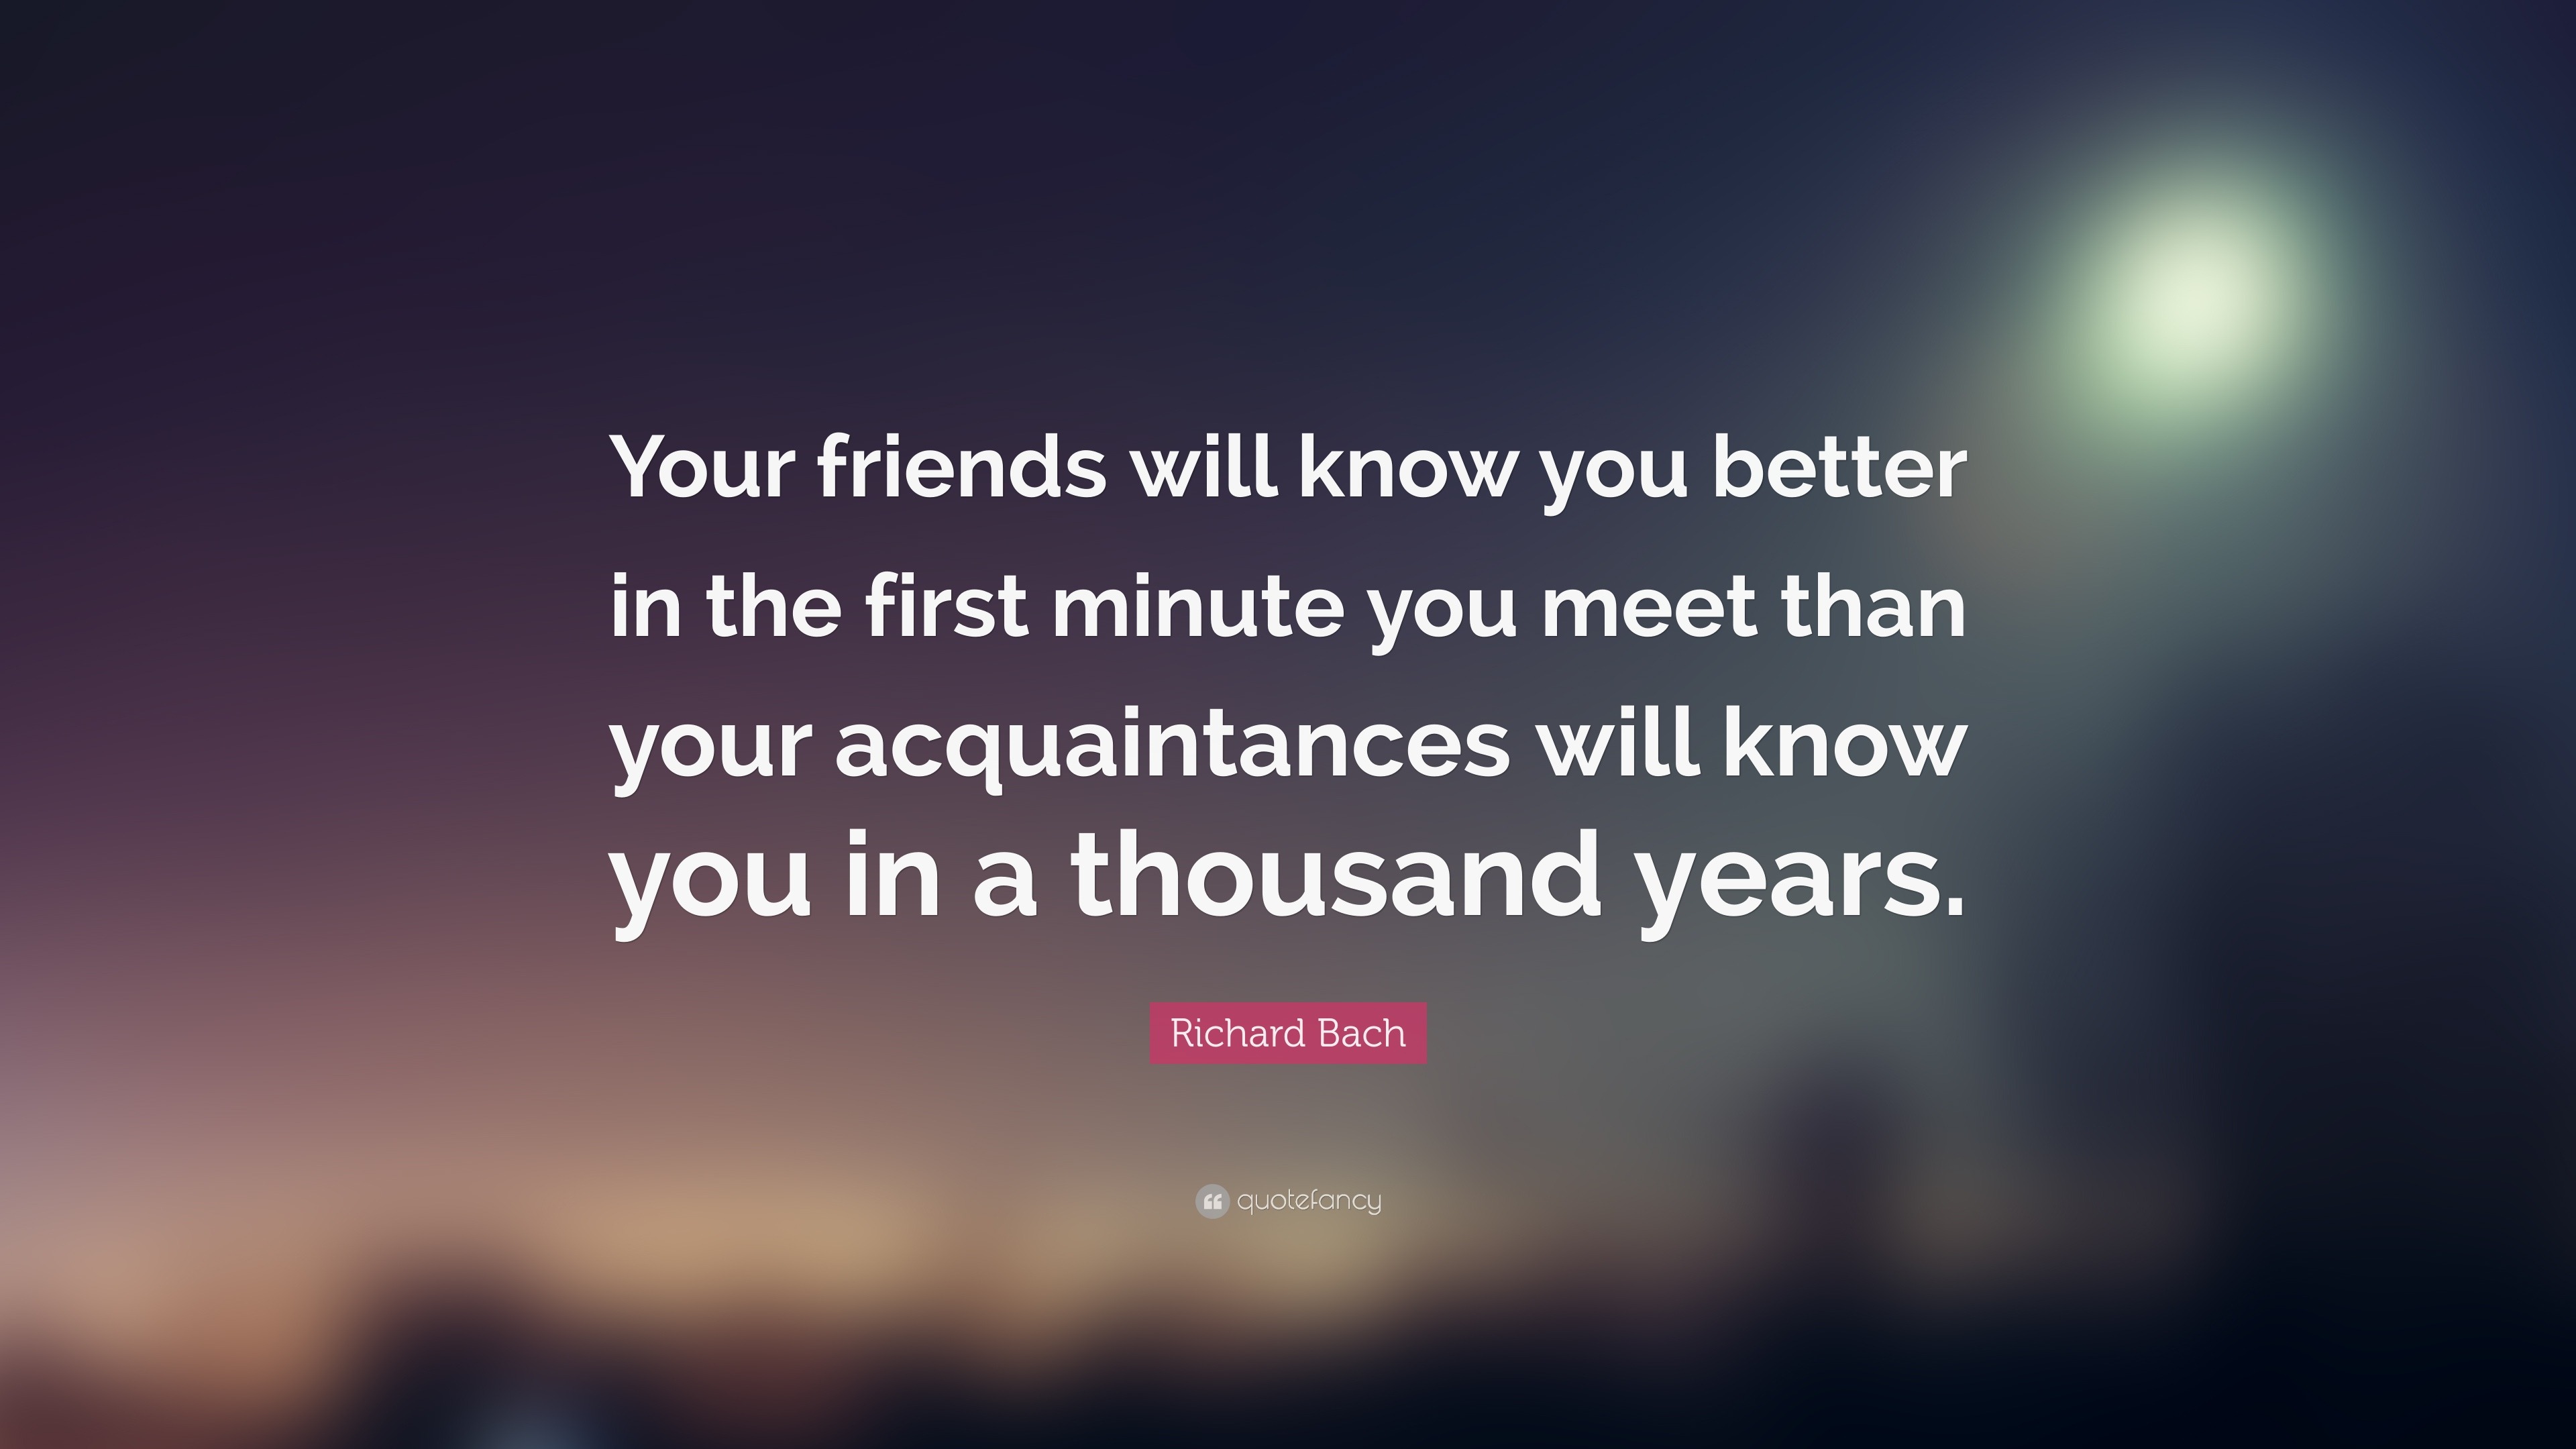 Richard Bach Quote Your Friends Will Know You Better In The First Minute You Meet Than Your Acquaintances Will Know You In A Thousand Years